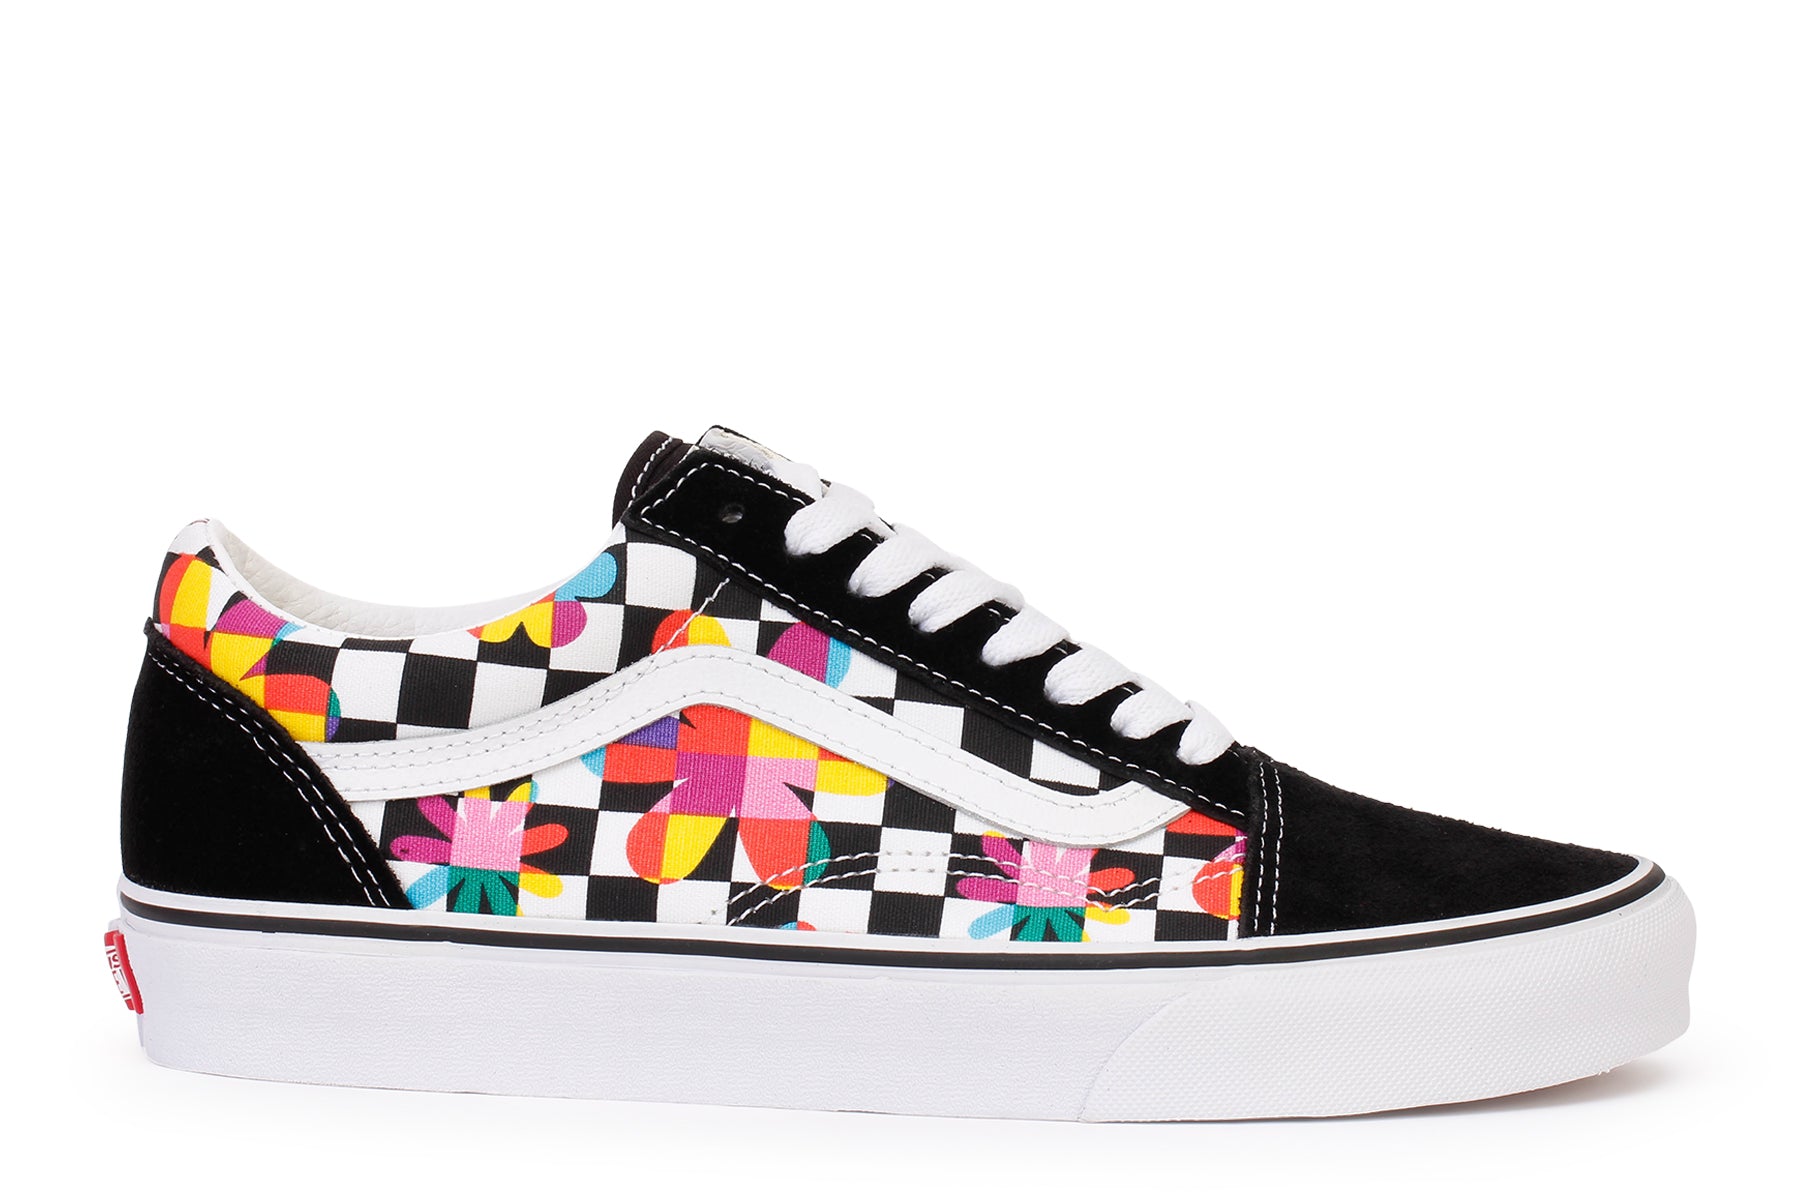 Old Skool Floral Checkerboard Shoes